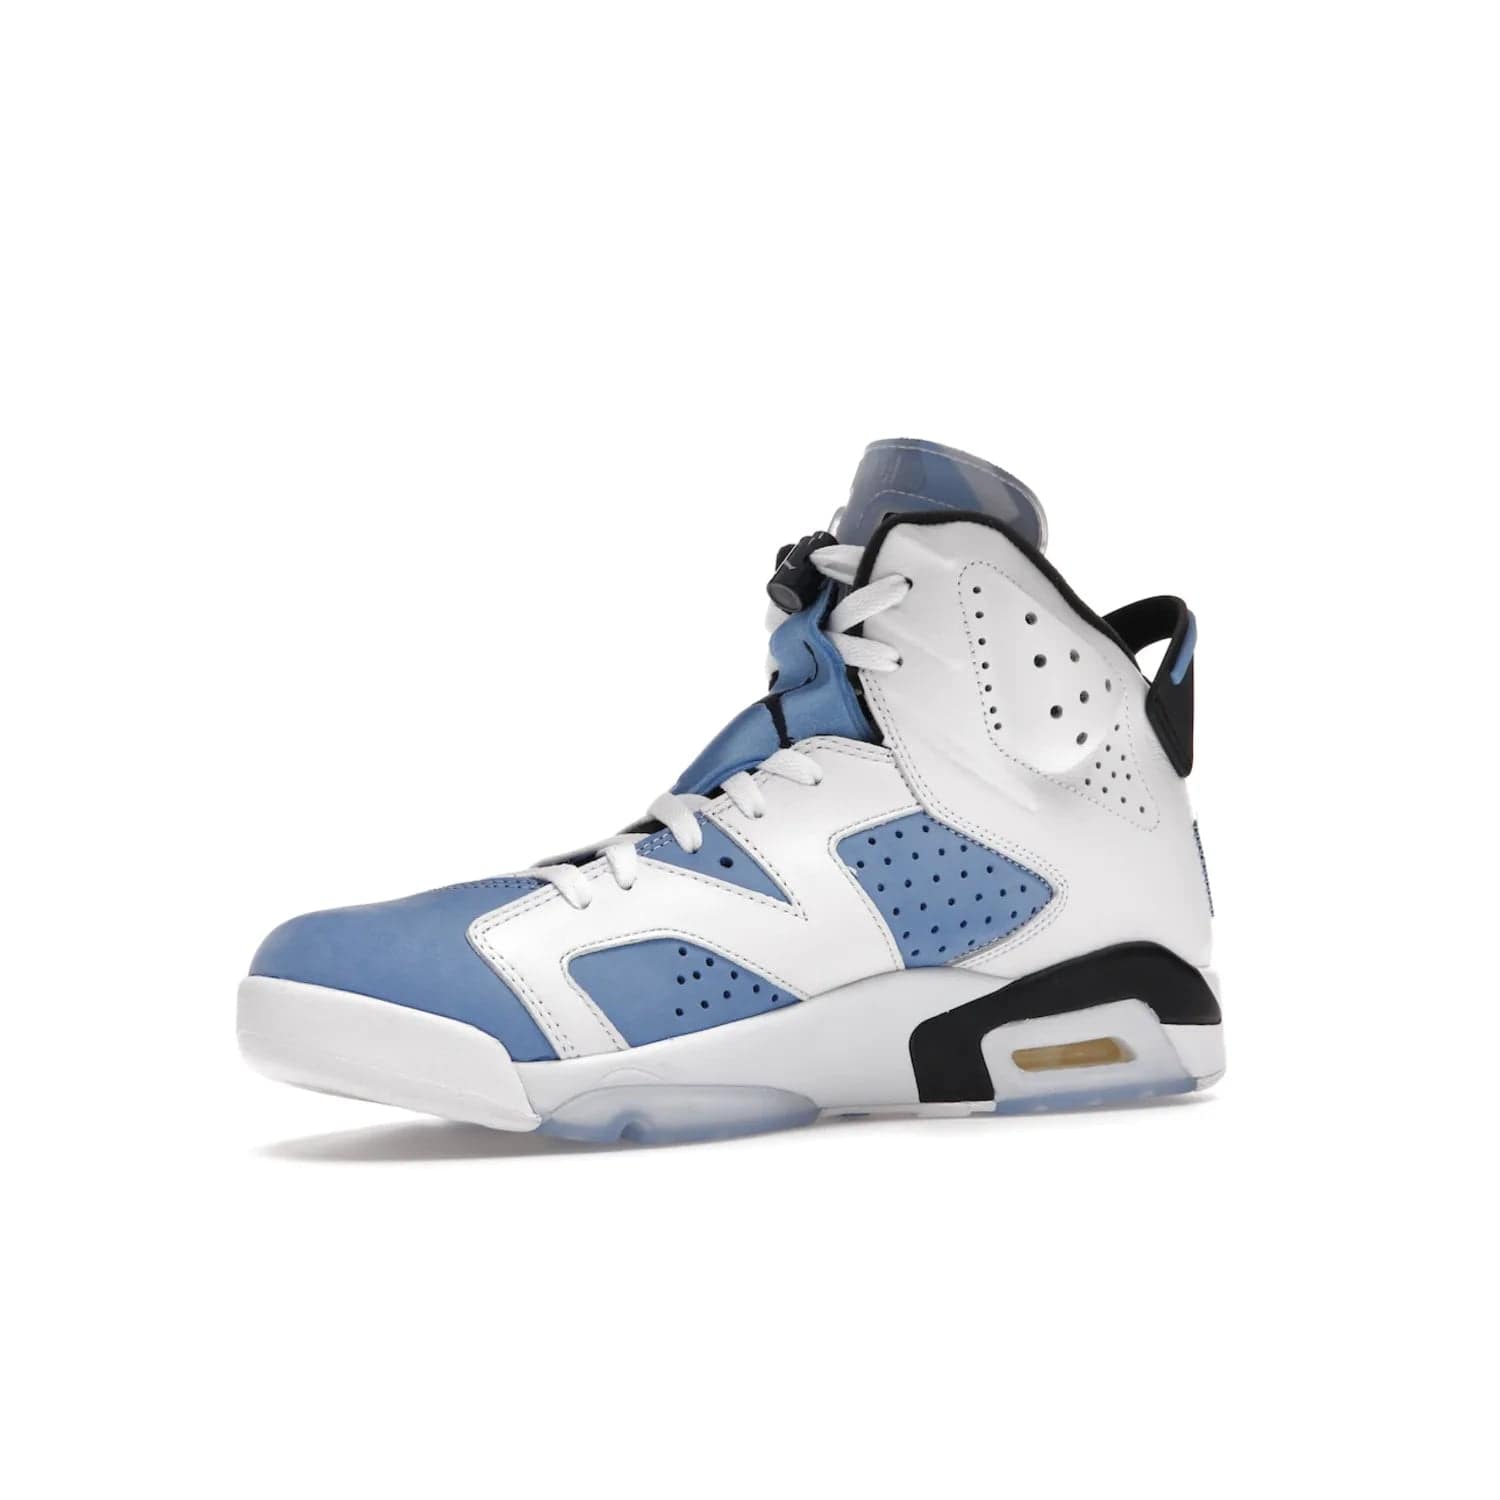 Jordan 6 Retro UNC White - Image 16 - Only at www.BallersClubKickz.com - Air Jordan 6 Retro UNC White with classic UNC colors brings nostalgia and style to a legendary silhouette. Celebrate MJ's alma mater with navy blue accents, icy semi-translucent sole and Jordan Team patch. Out March 2022 for the Sneaker Enthusiast.